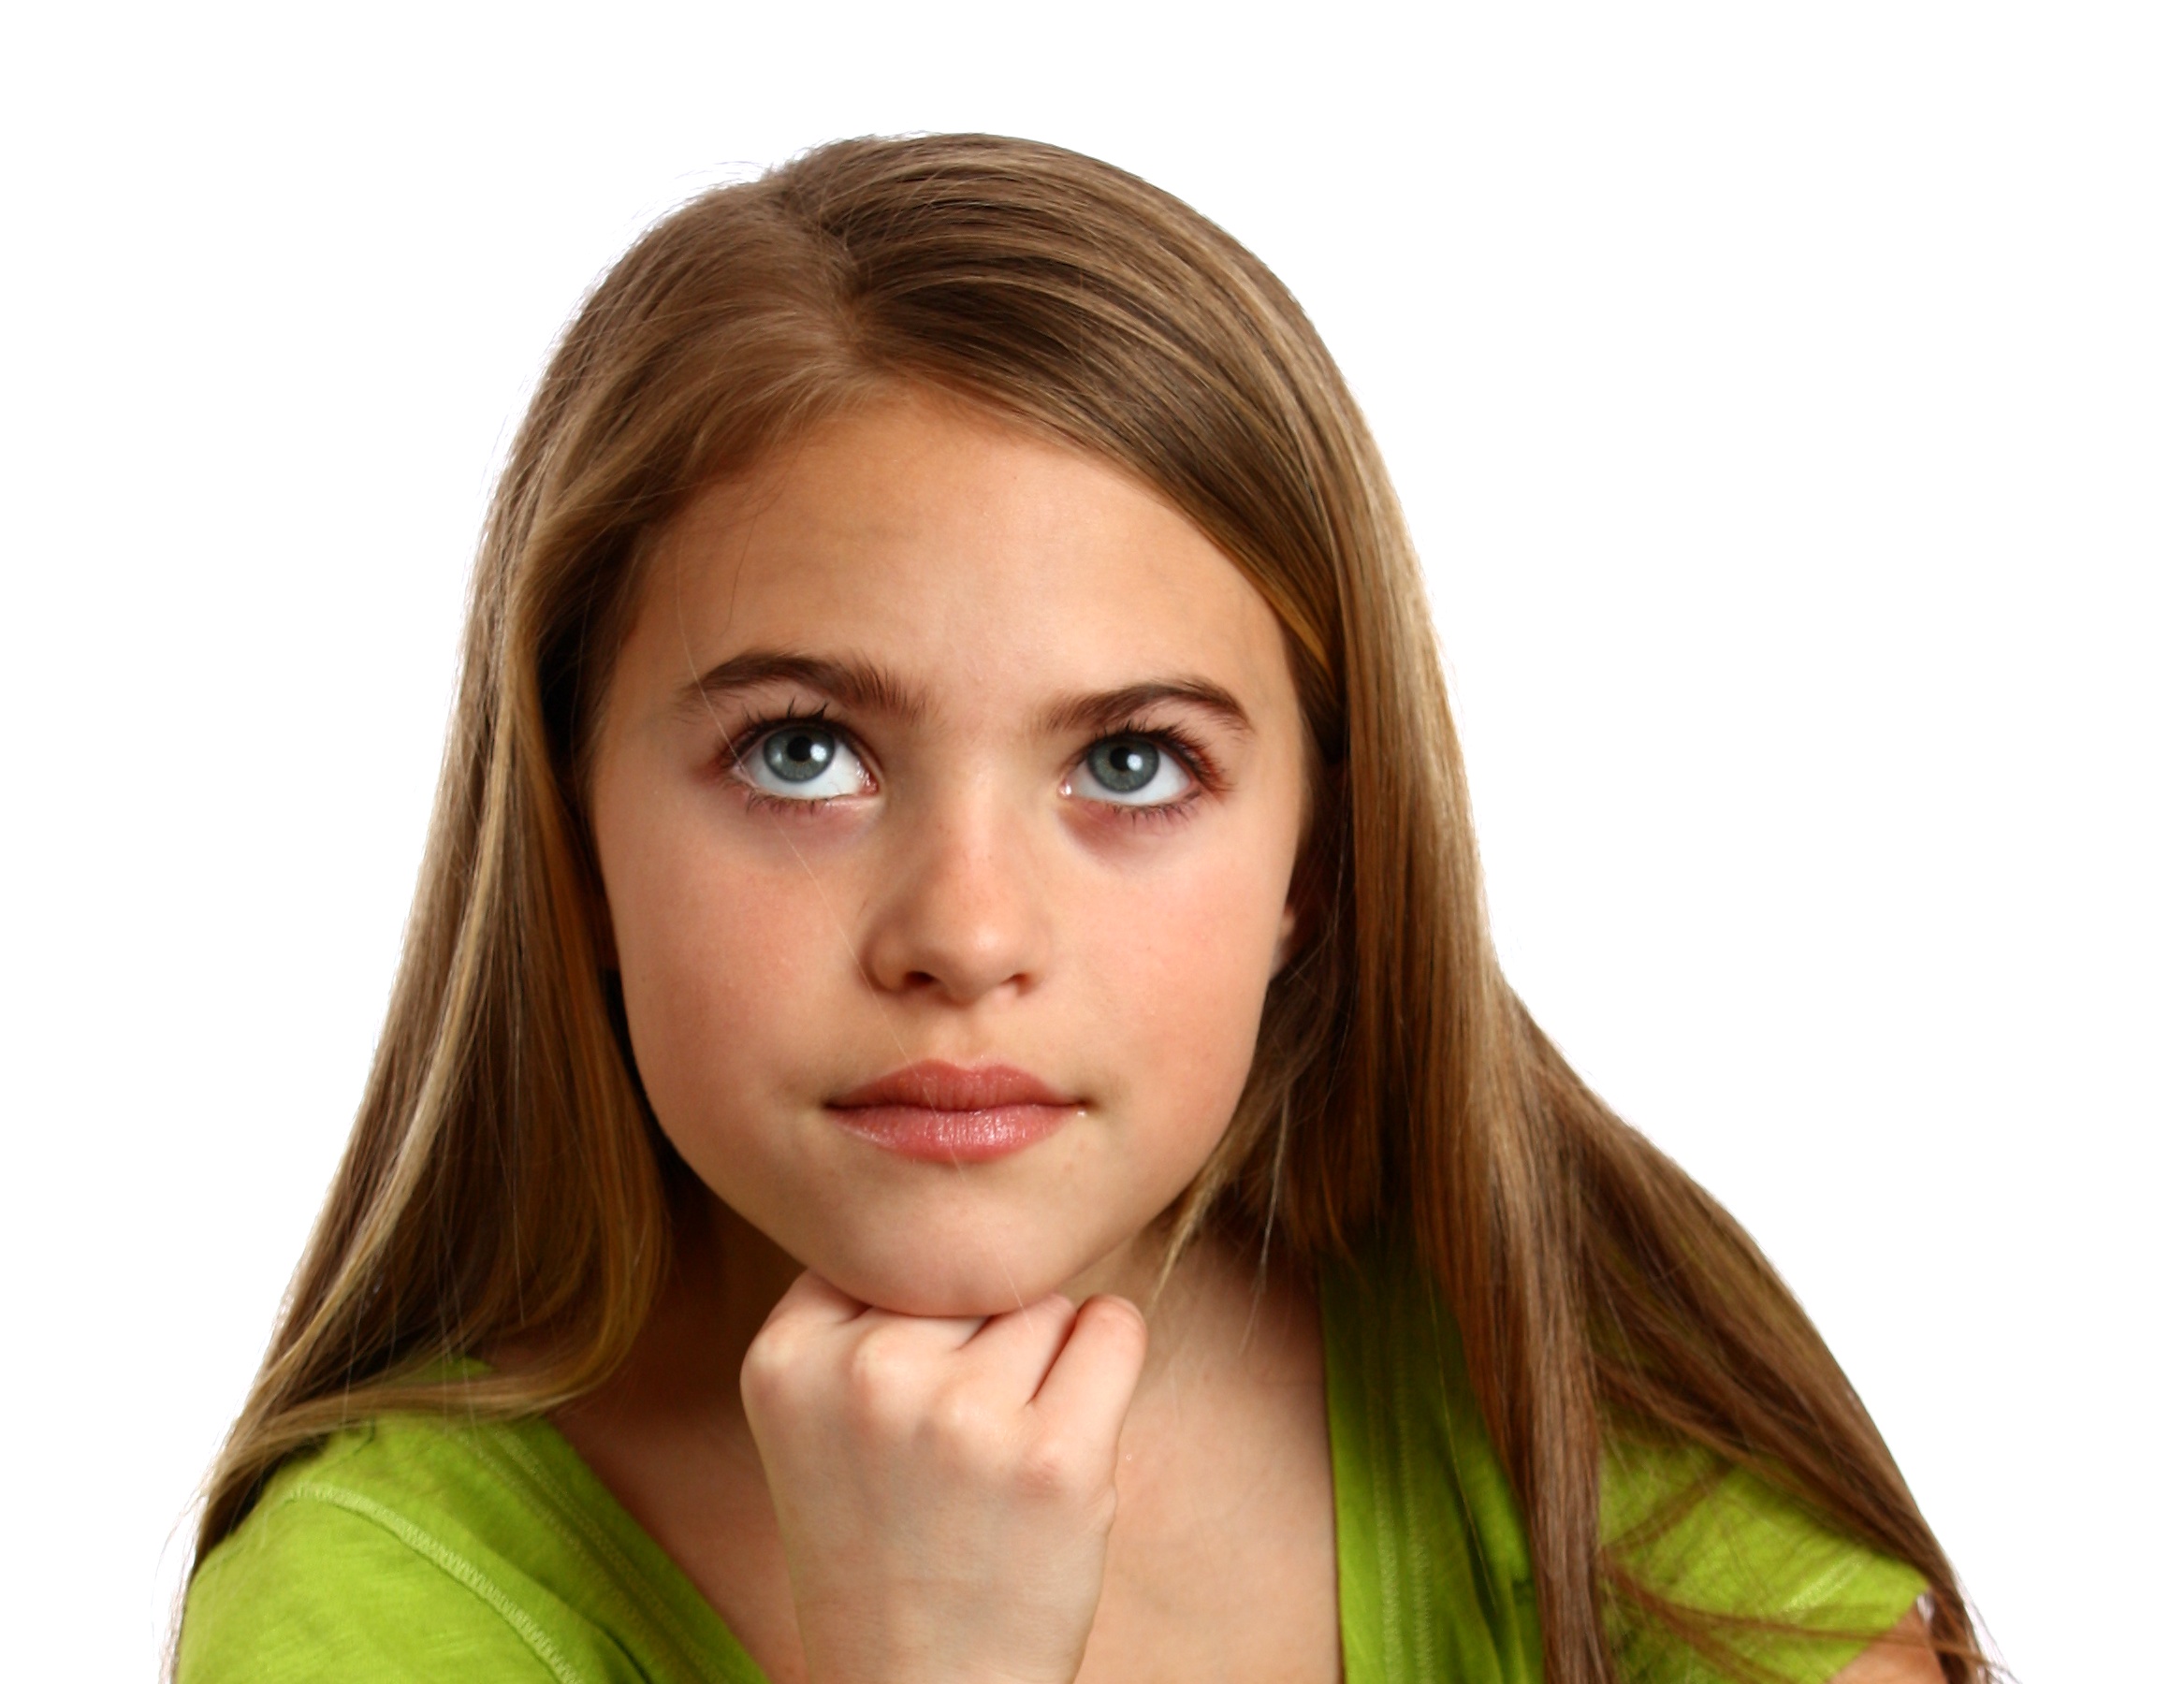 Young girl with a thoughtful expression, Beautiful, Children, Cute, Expressions, HQ Photo